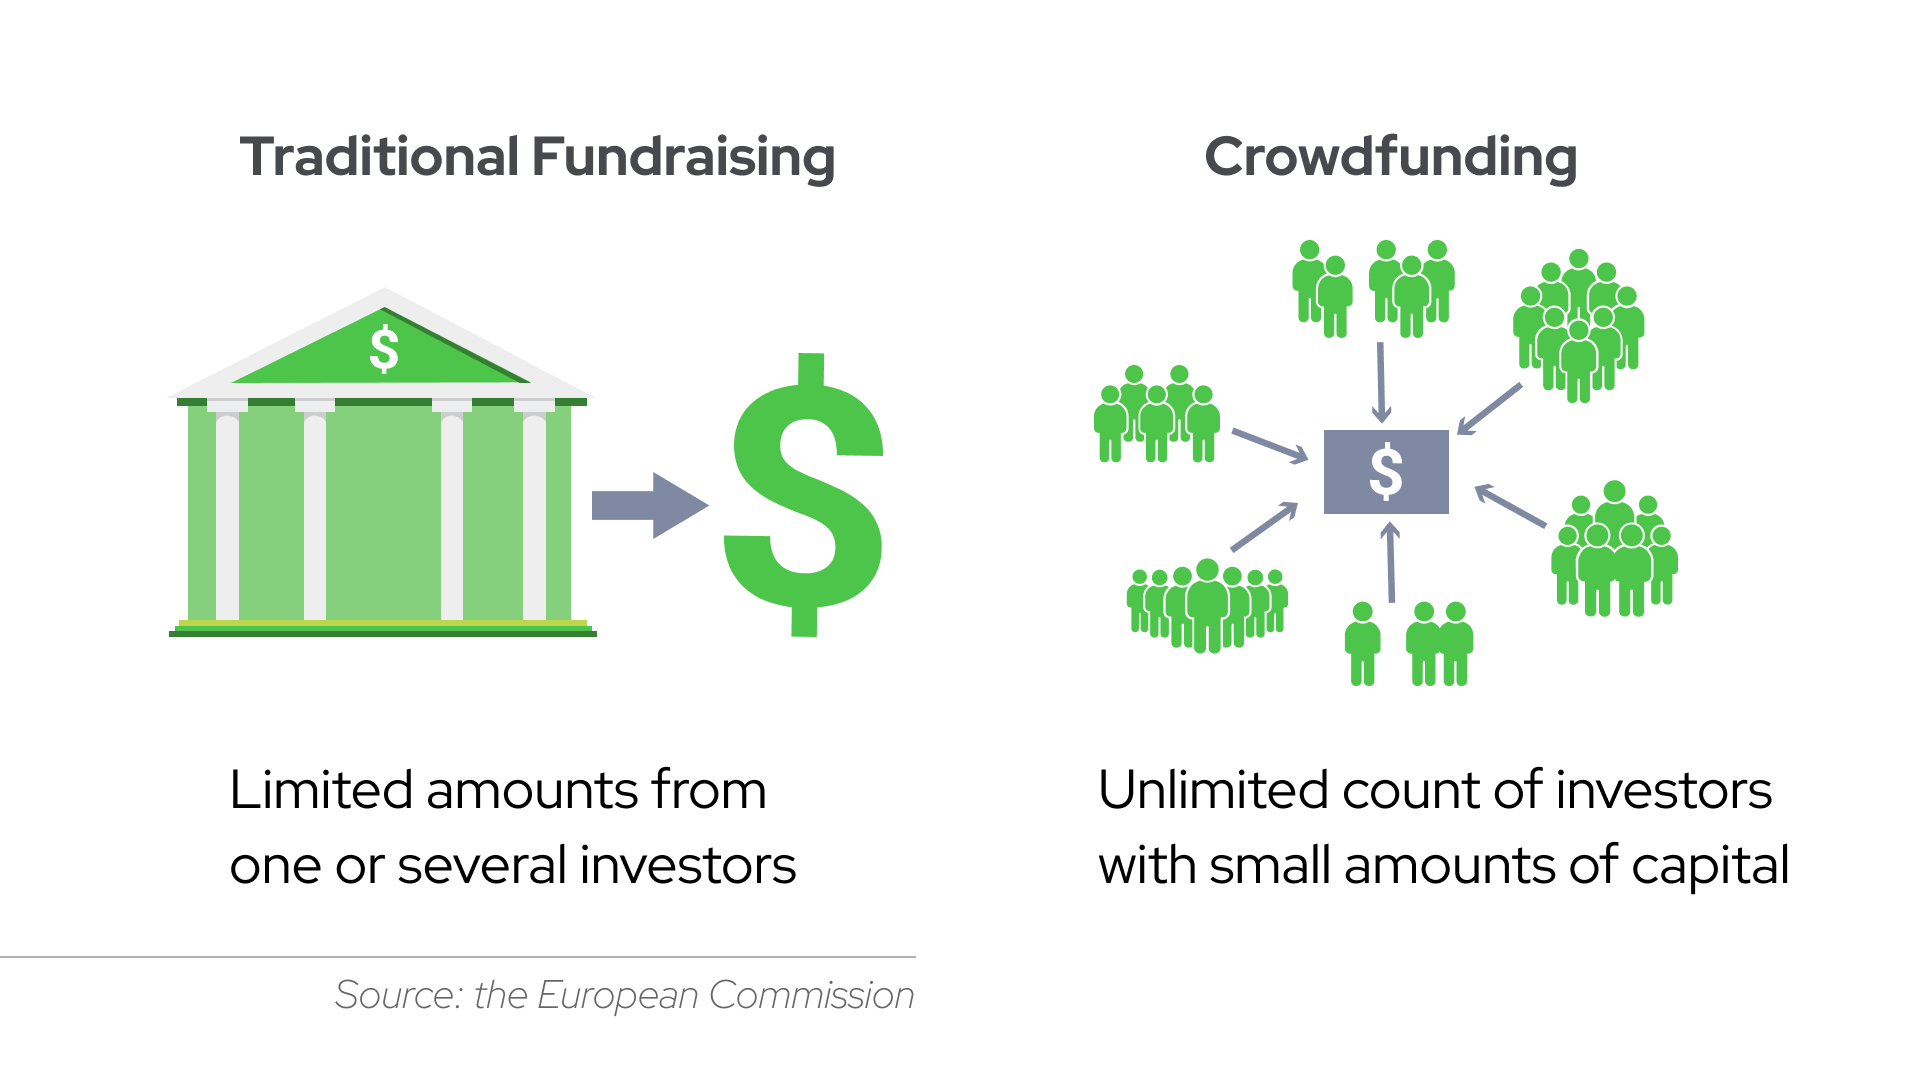 Traditional fundraising implies limited amounts from one or several investors who invest with equal terms. Crowdfunding, in turn, allows for an unlimited count of investors with different terms and sums.